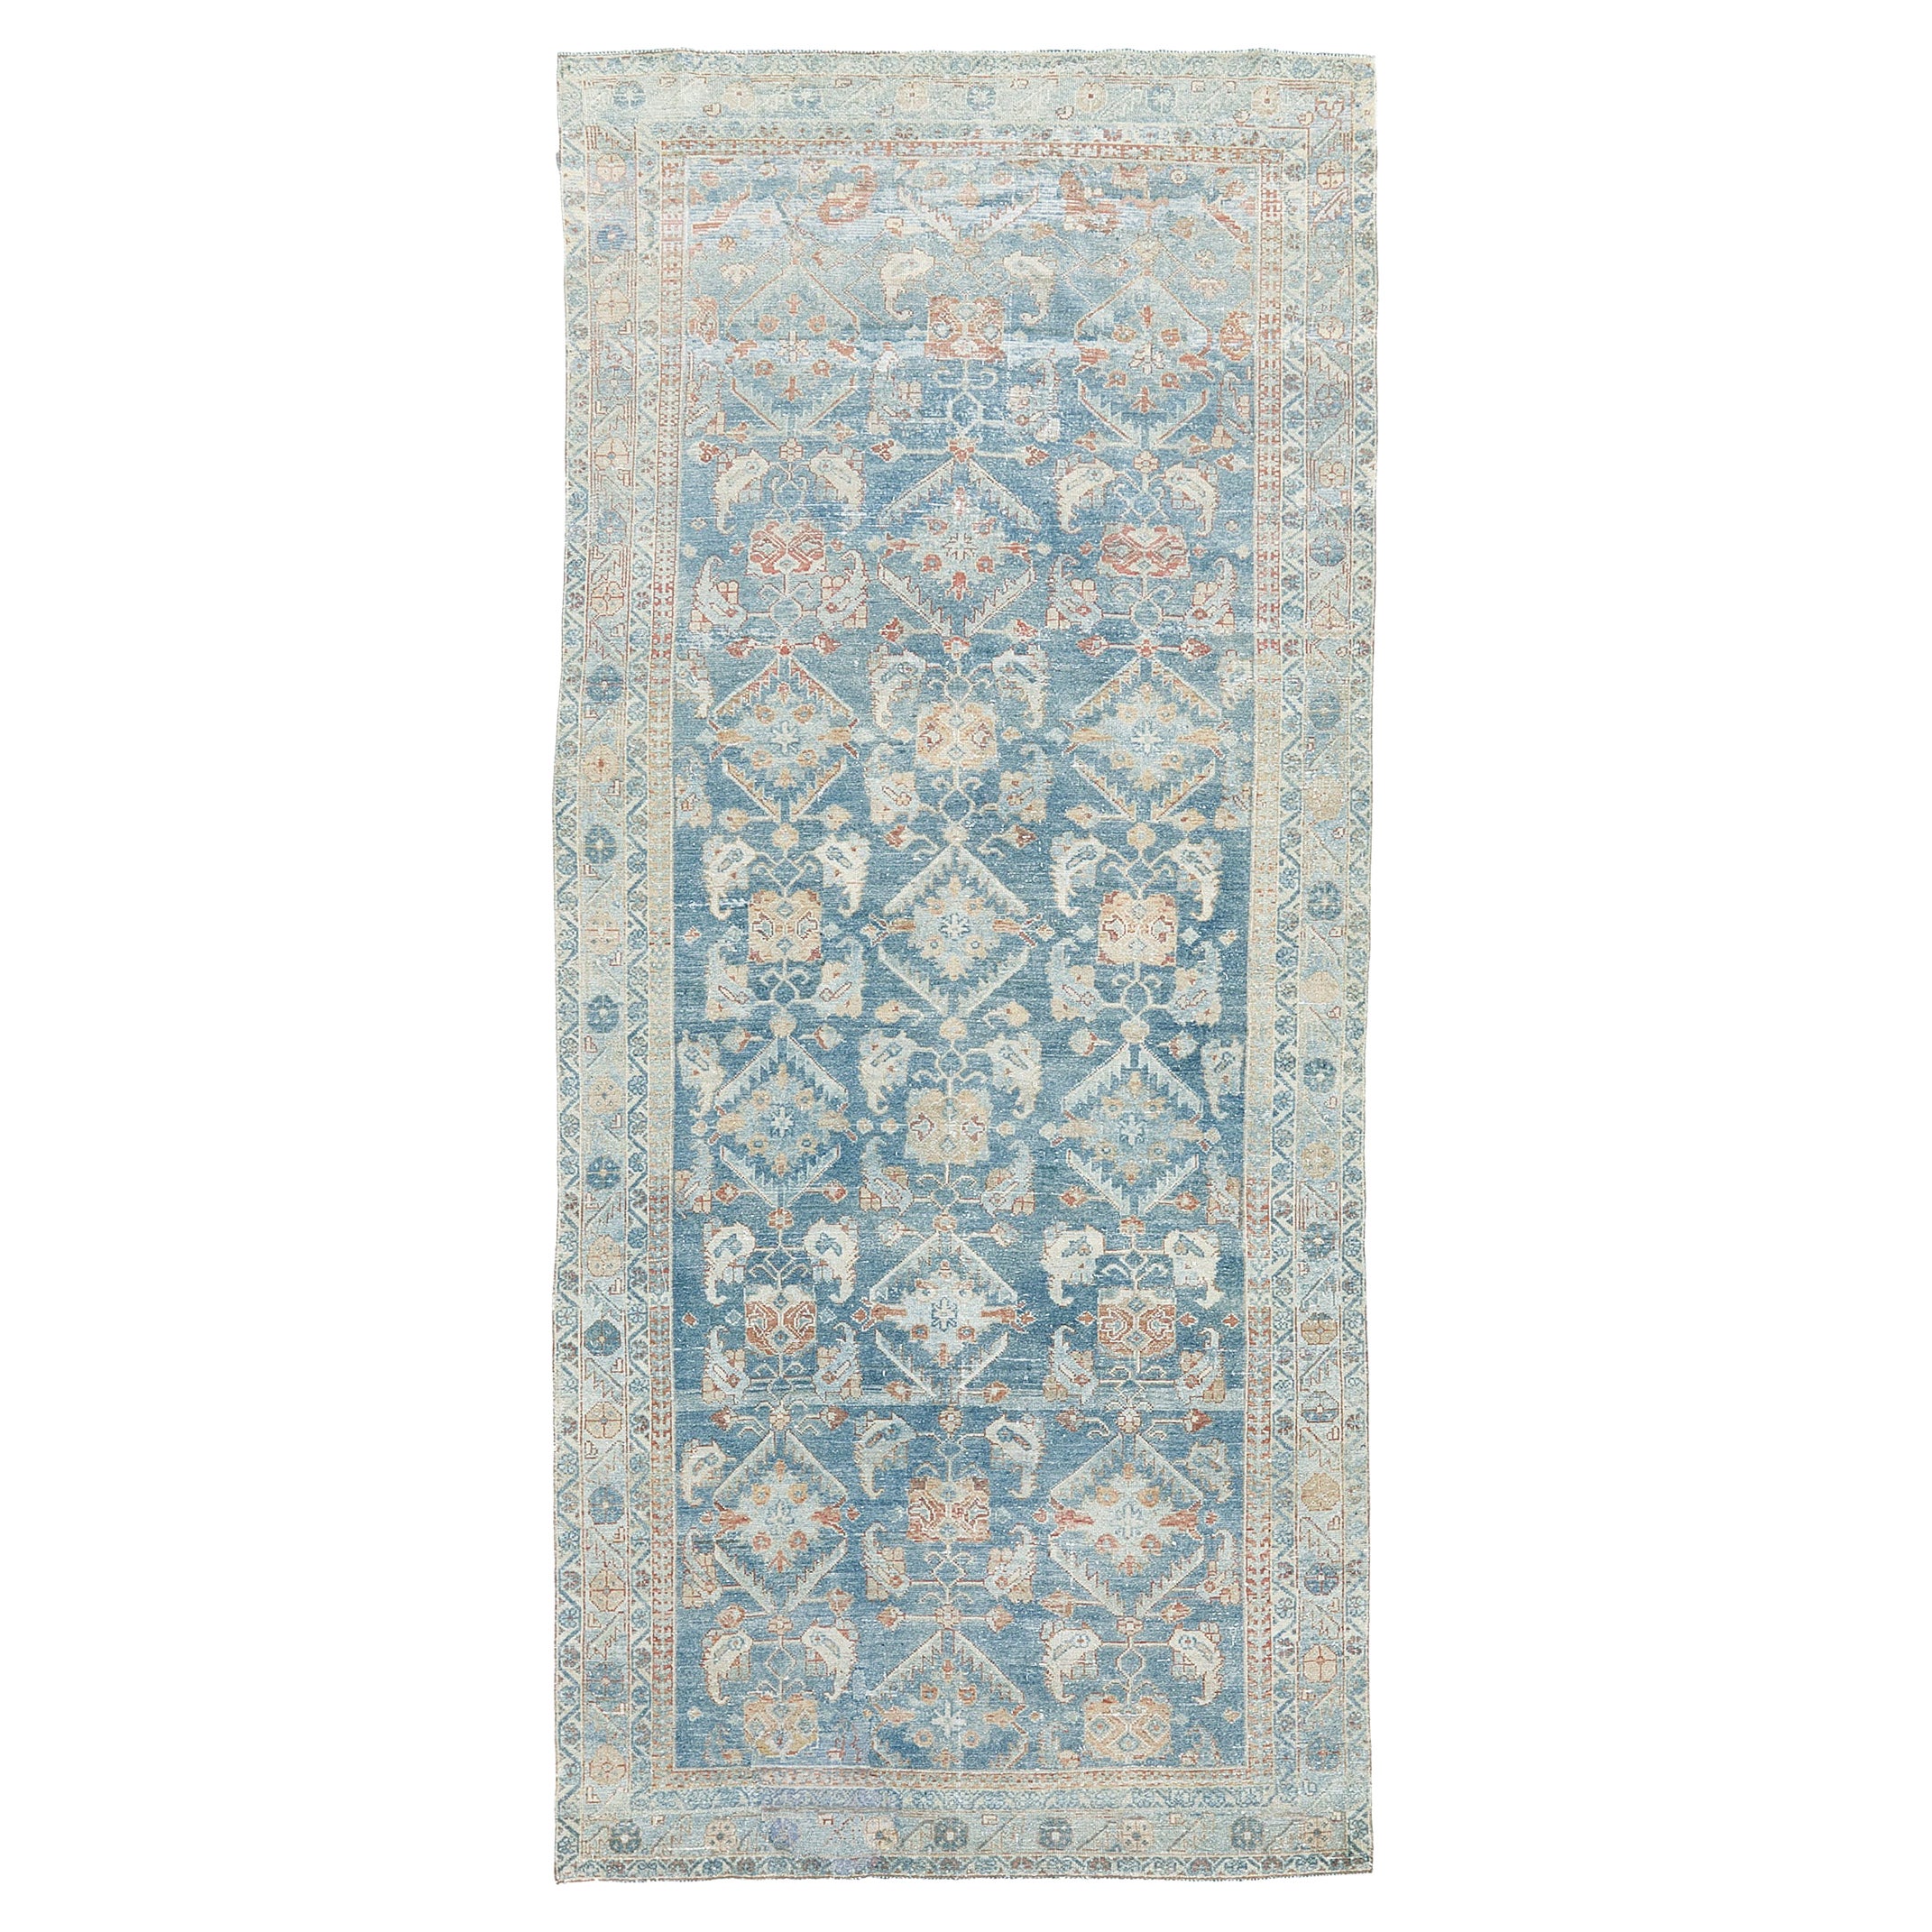 Antique Persian Malayer Runner 29965 For Sale